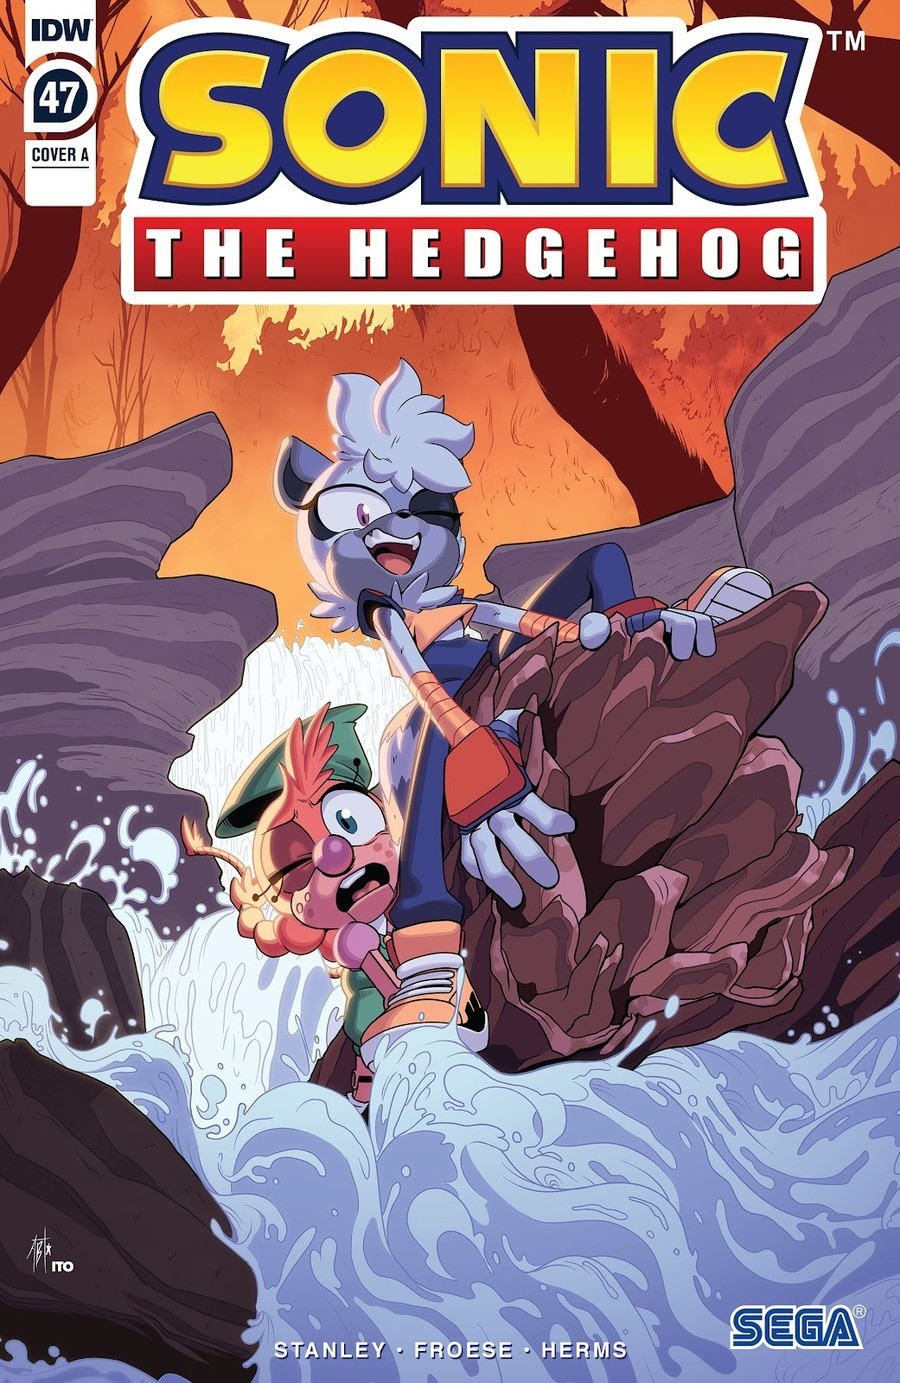 Sonic IDW #47. Merry Christmas Everybody! As a nice little gift, we got a new issue of the comic, aint that just fitting? Well let's see where this little journ